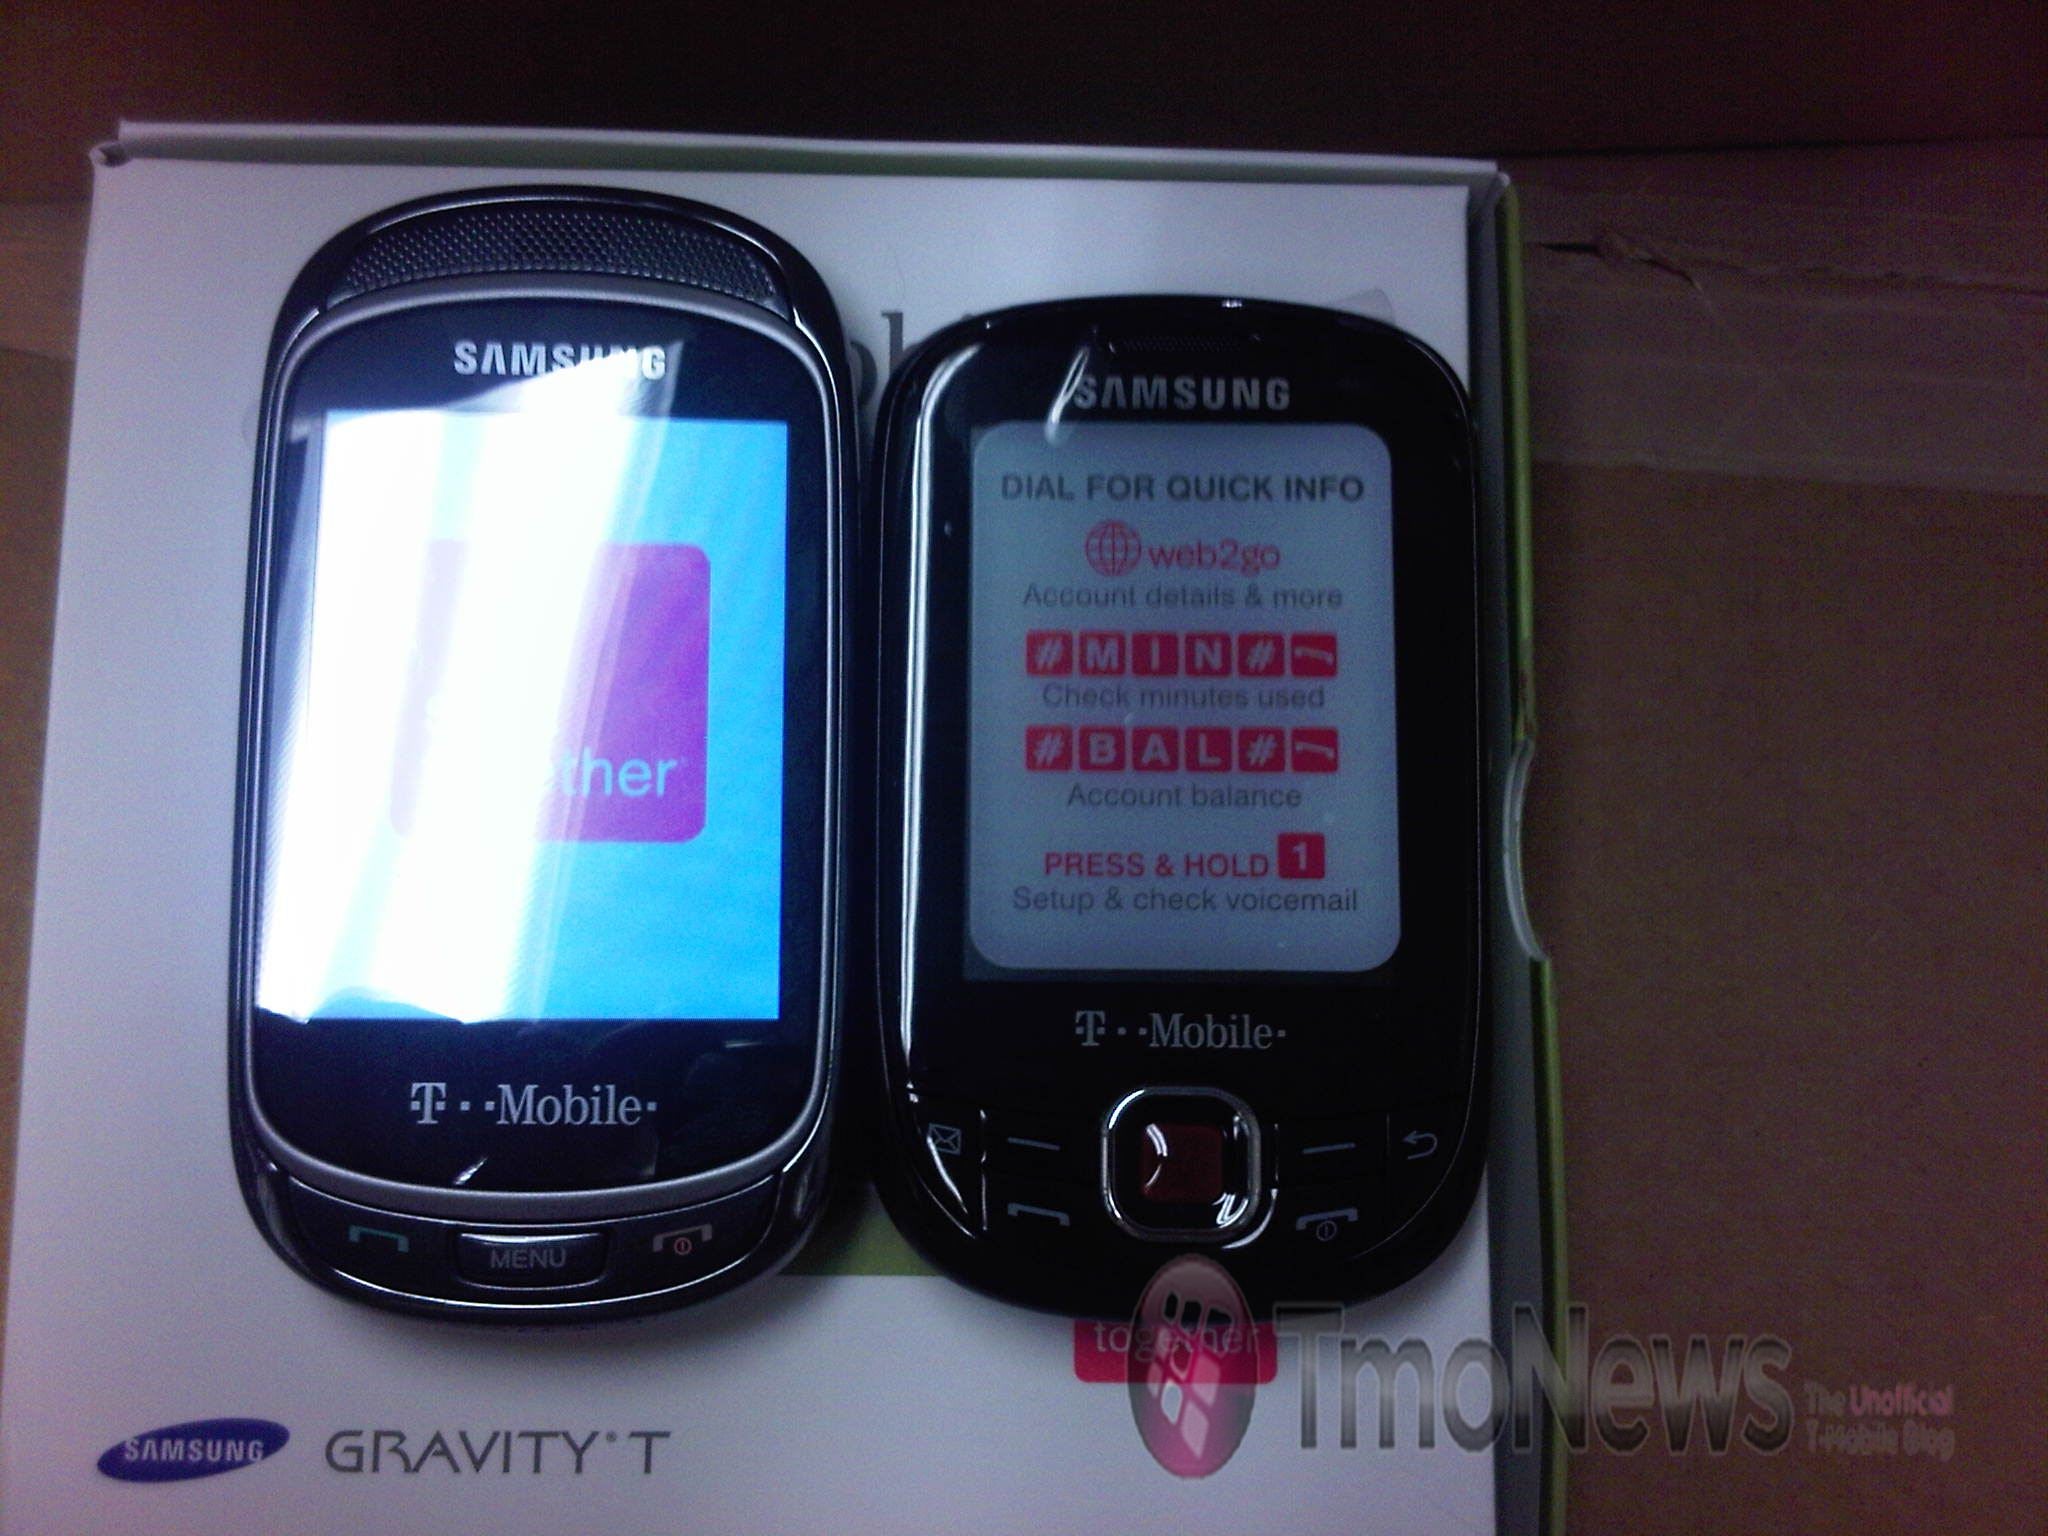 Samsung Gravity T and :) make their first appearance on camera